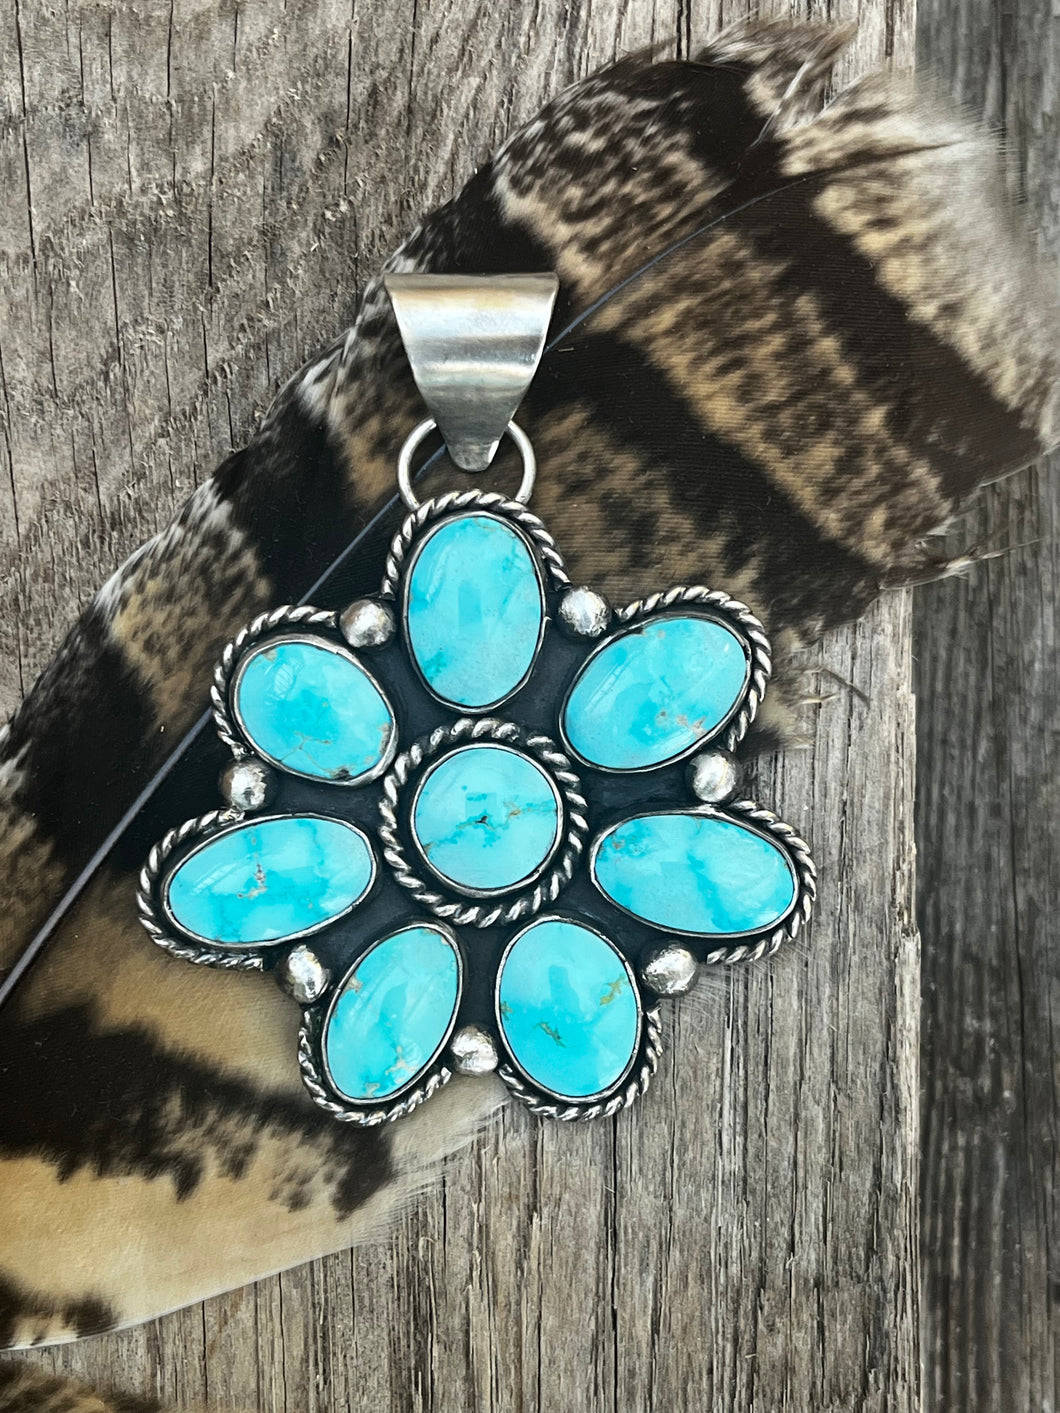 Natural Campitos Turquoise set in sterling silver with silver twist wire and silver balls. This turquoise cluster pendant was handmade by Taylor Made Silver.